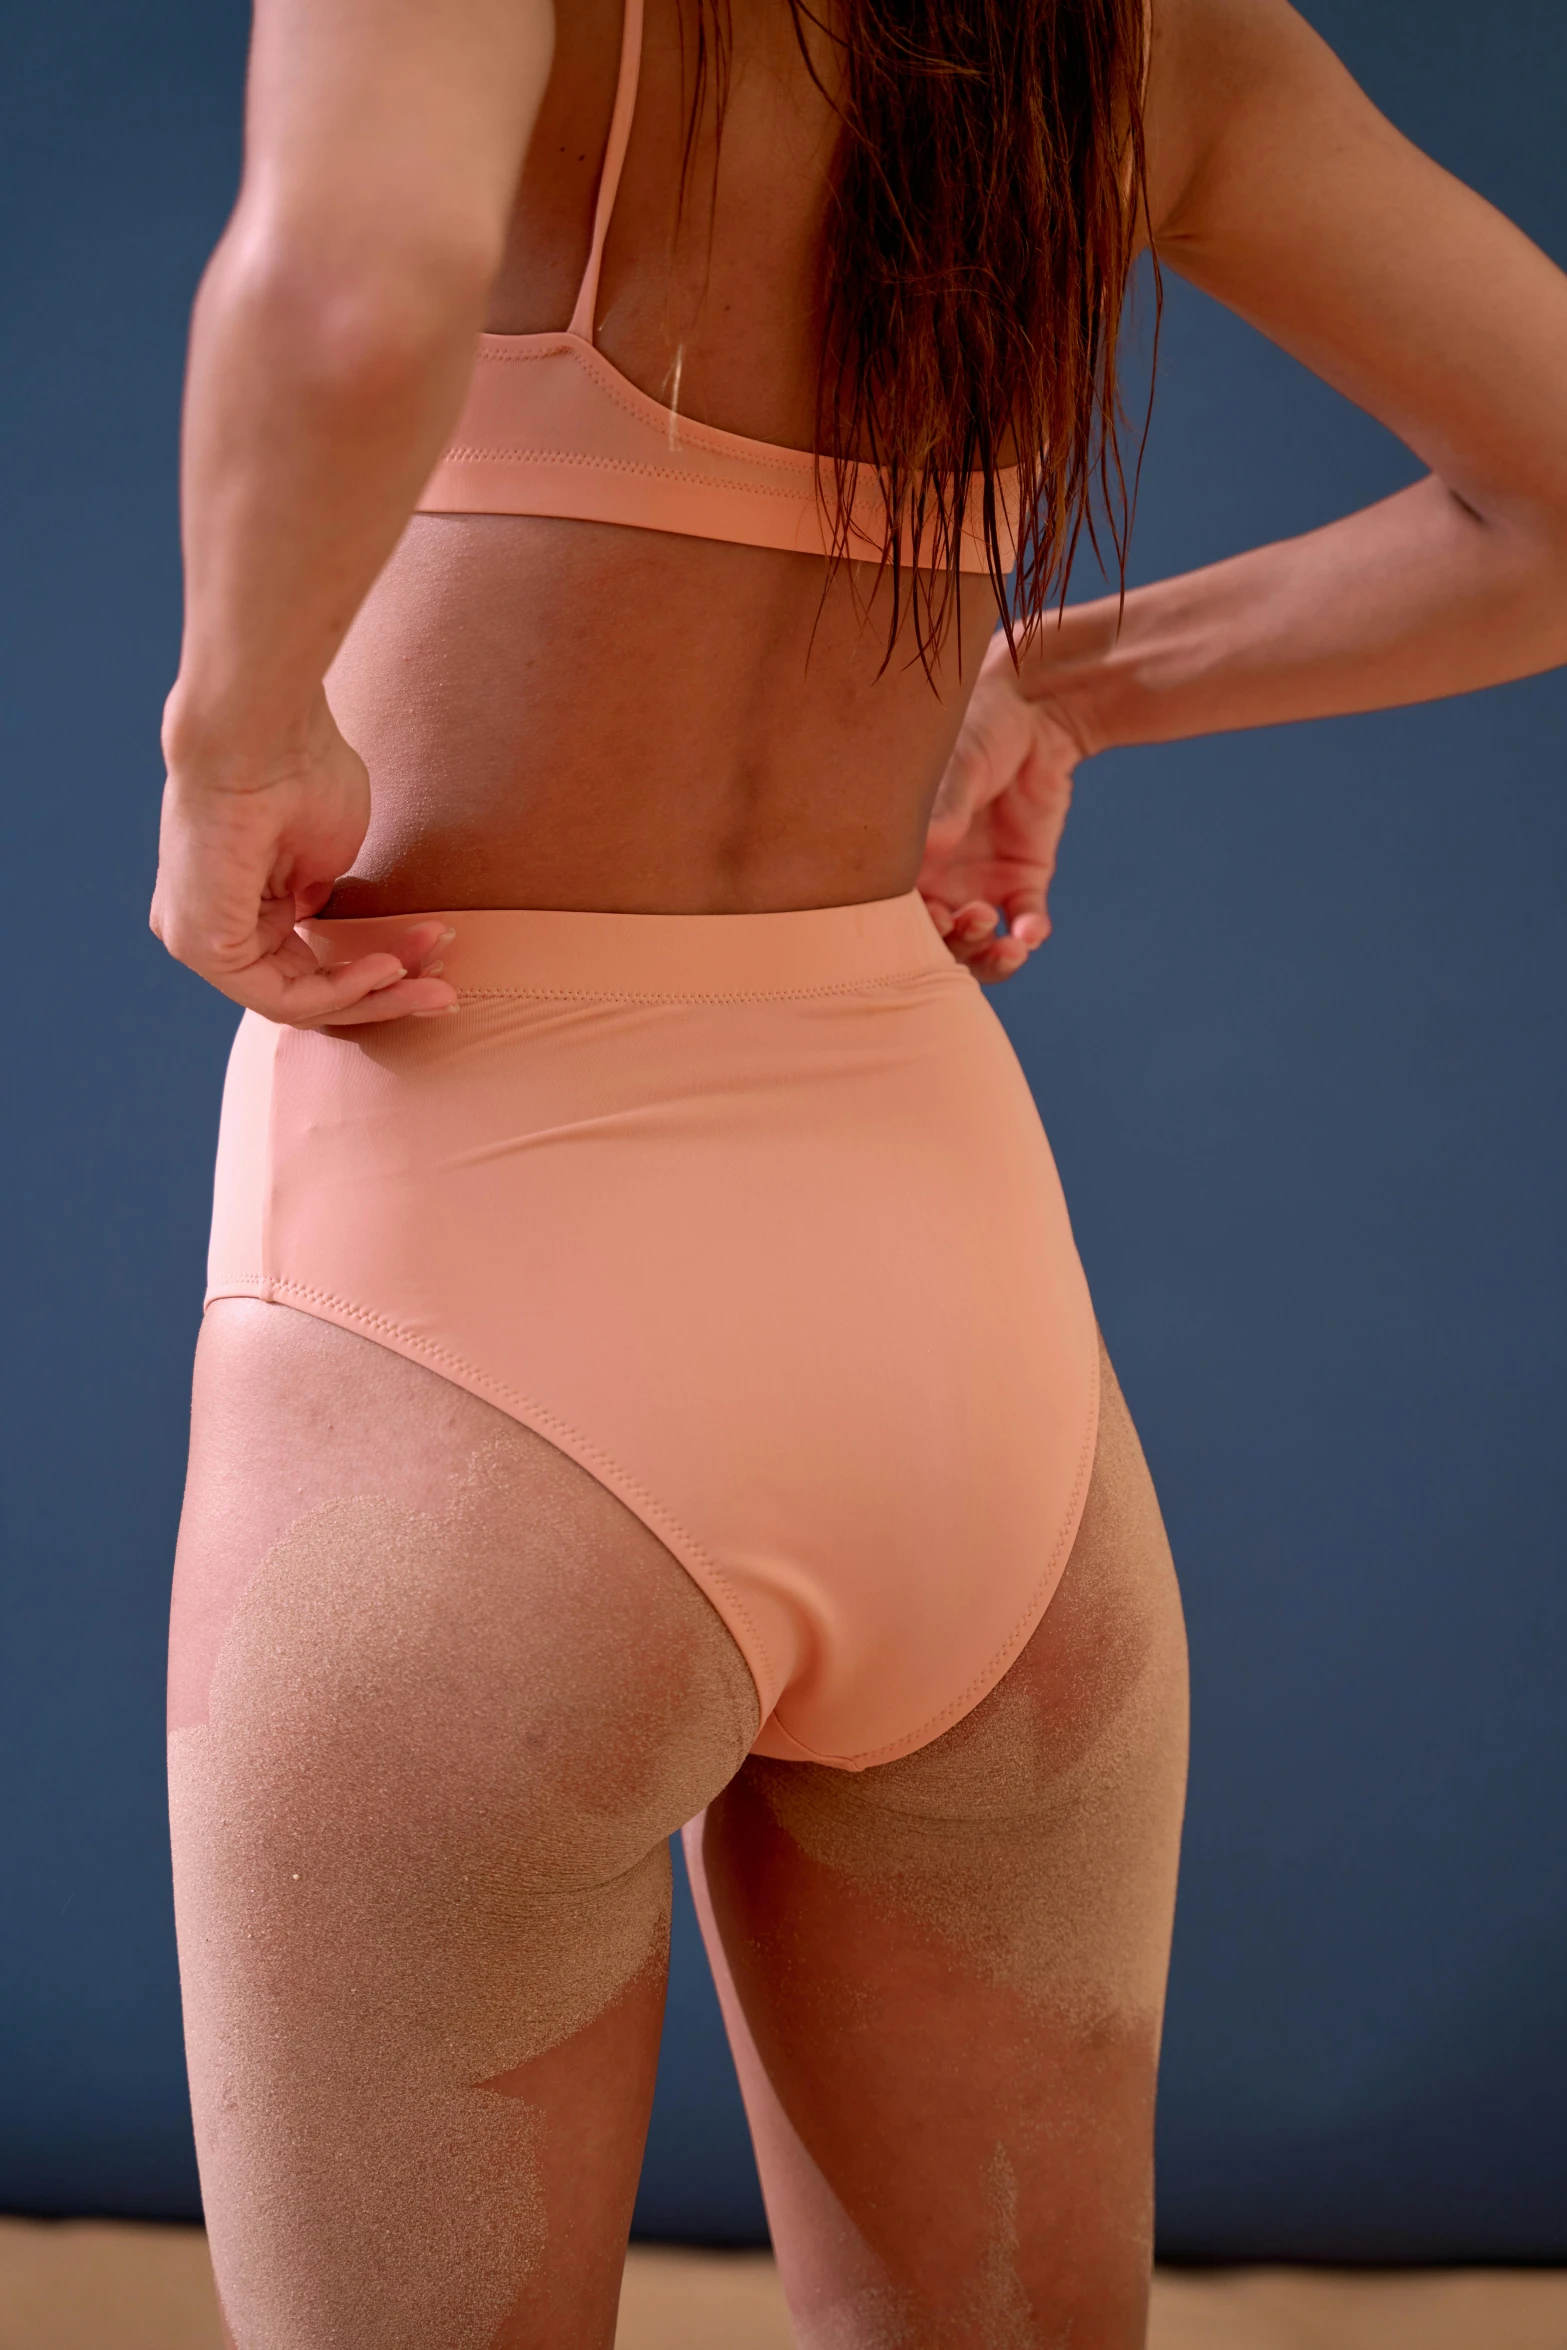 a woman in a pink underwear standing in front of a blue wall, inspired by Vanessa Beecroft, unsplash, toned orange and pastel pink, bend over posture, zoomed out view, performance